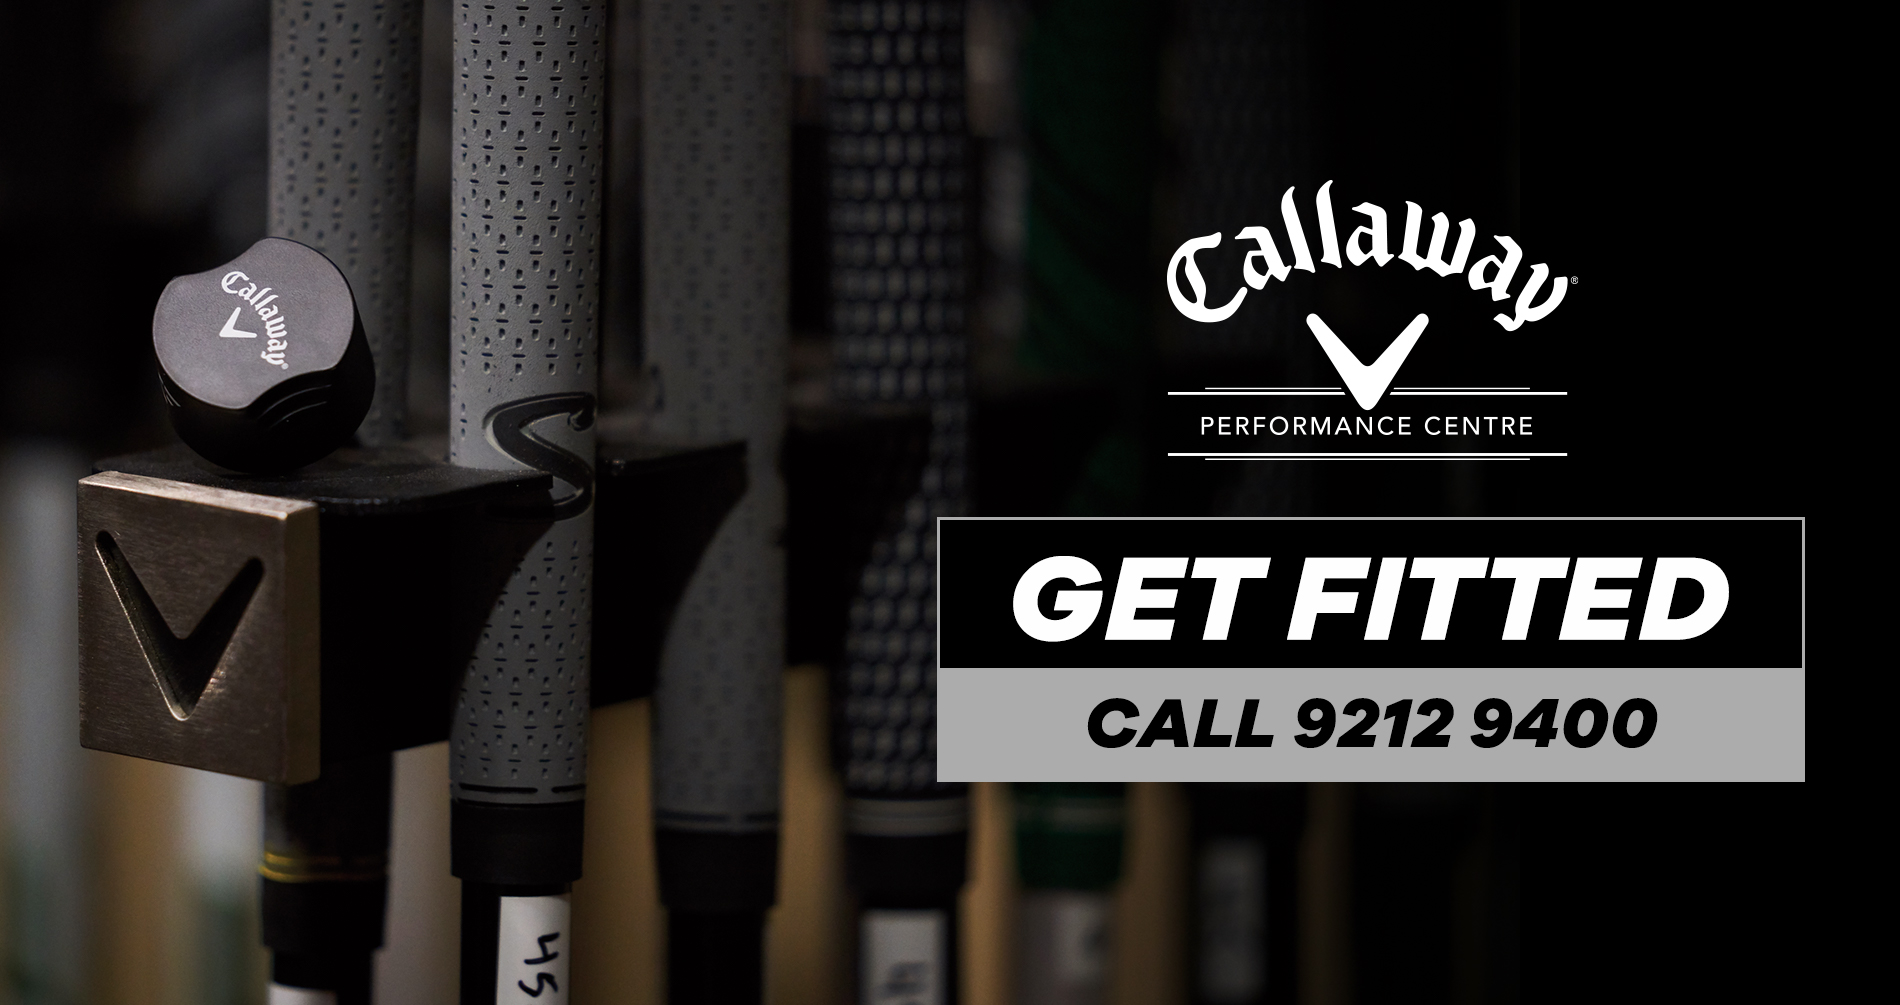 A fitting experience with Callaway Golf